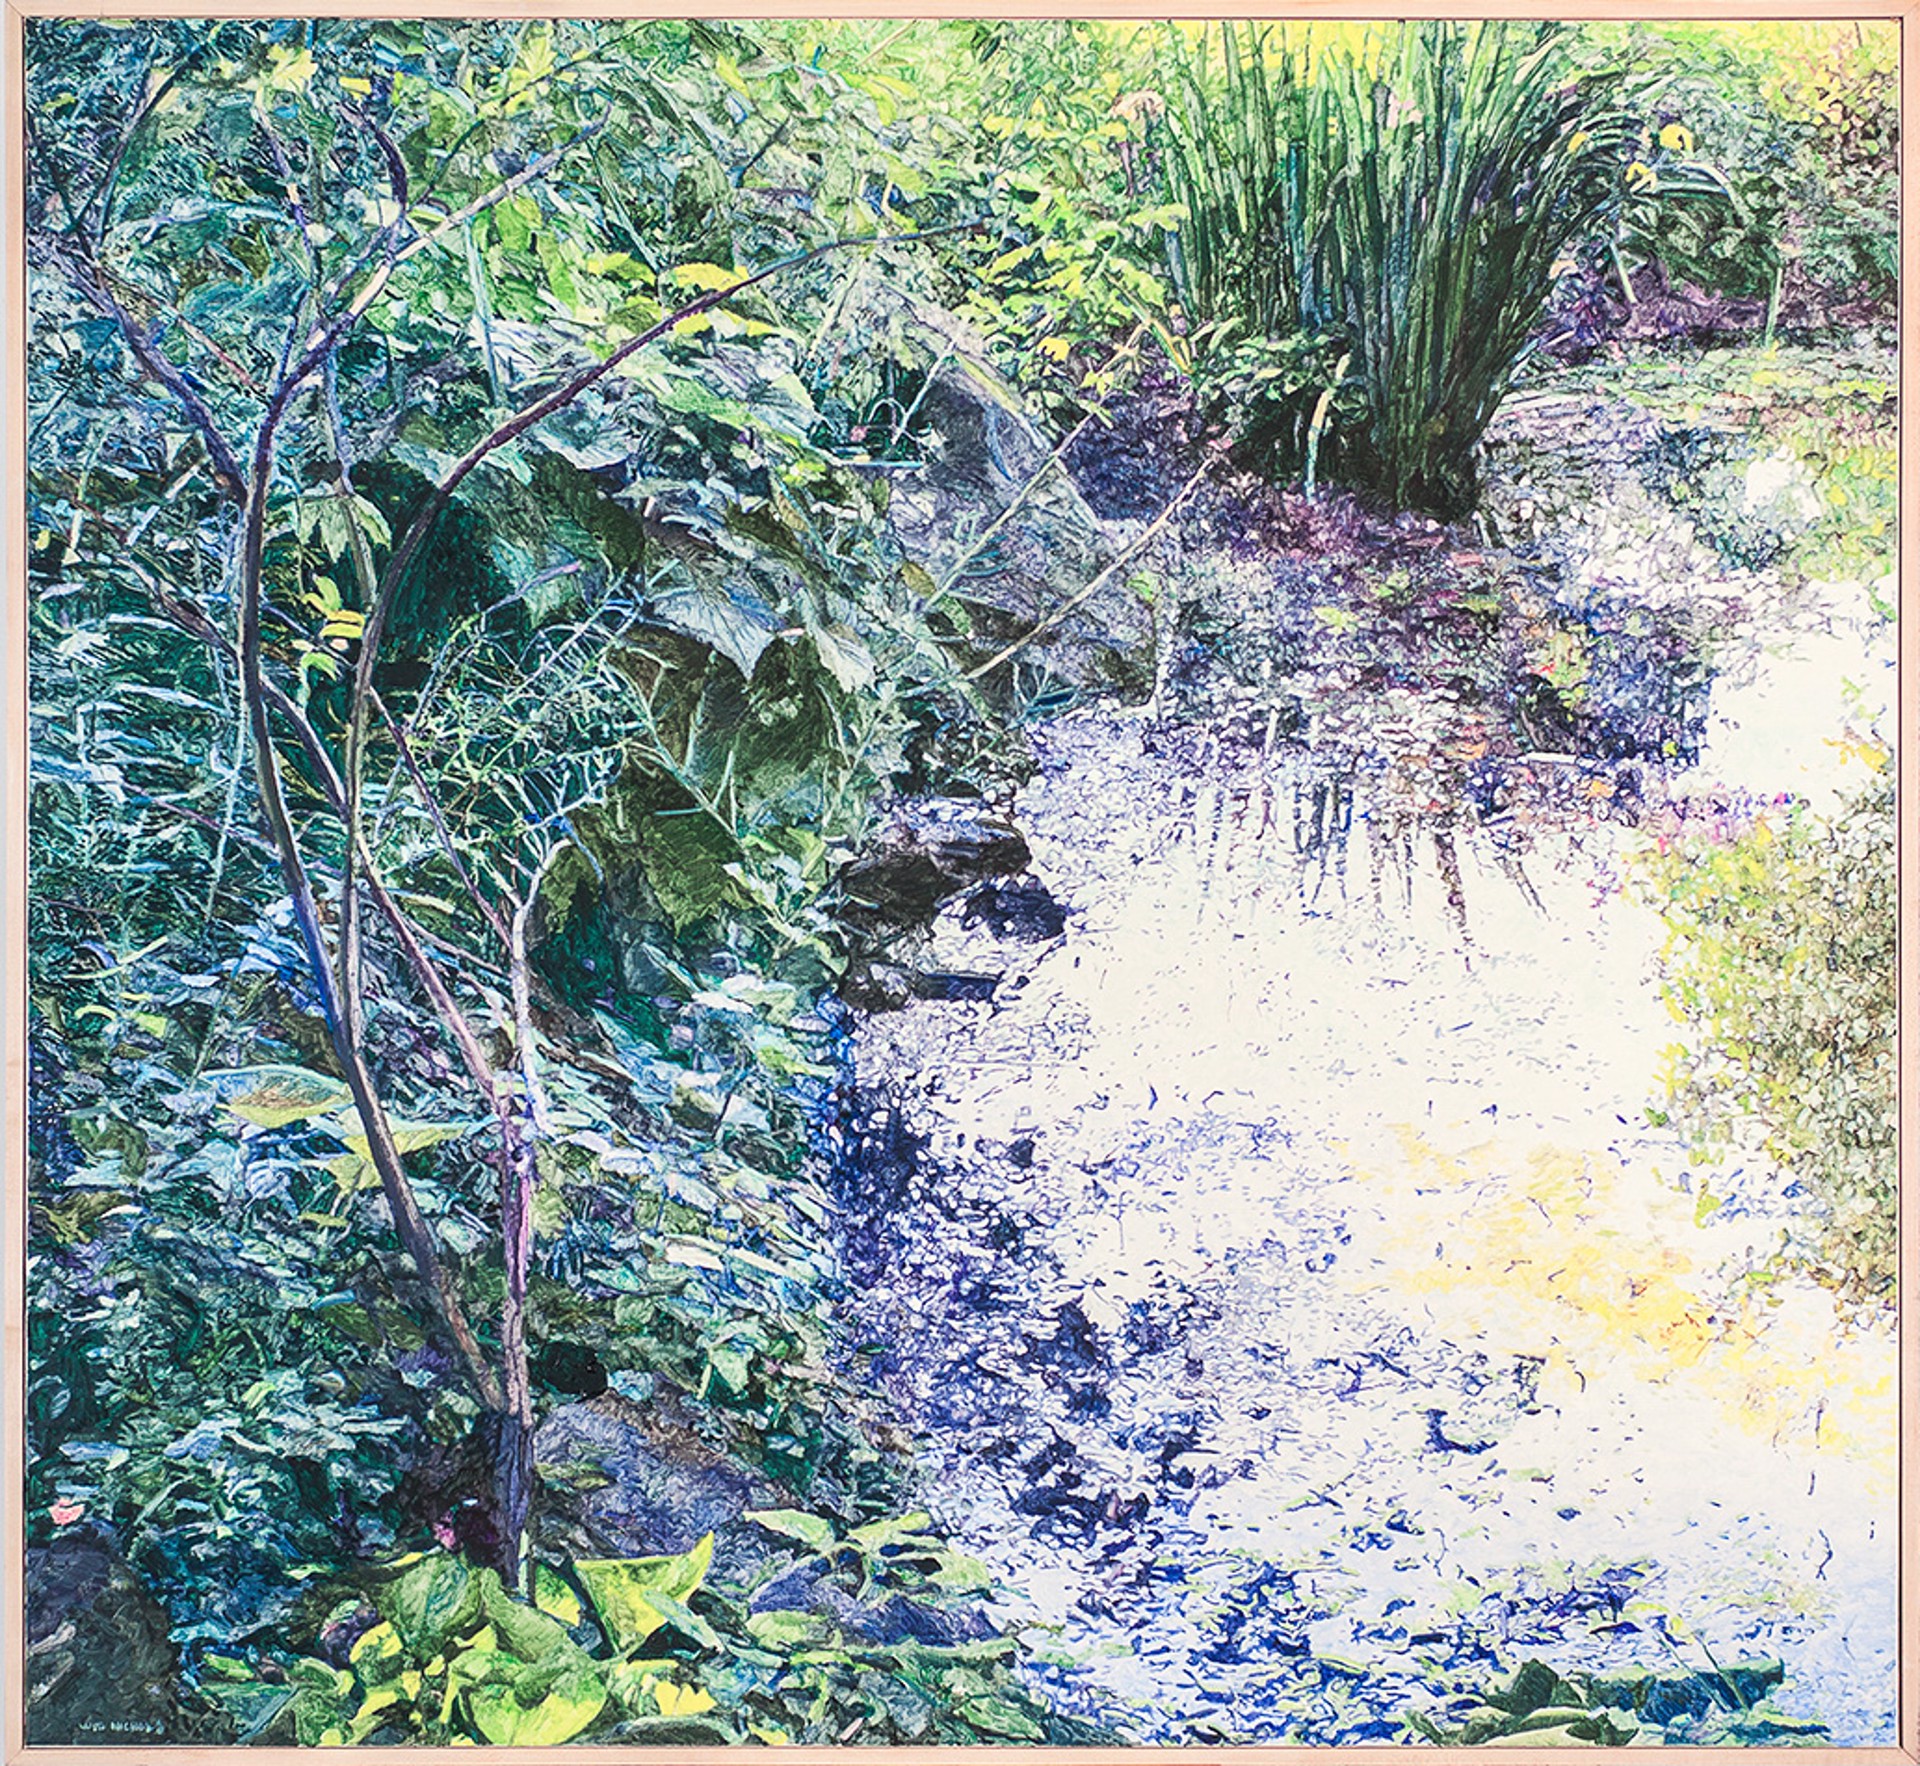 A Small Pond in Late Spring by William Nichols